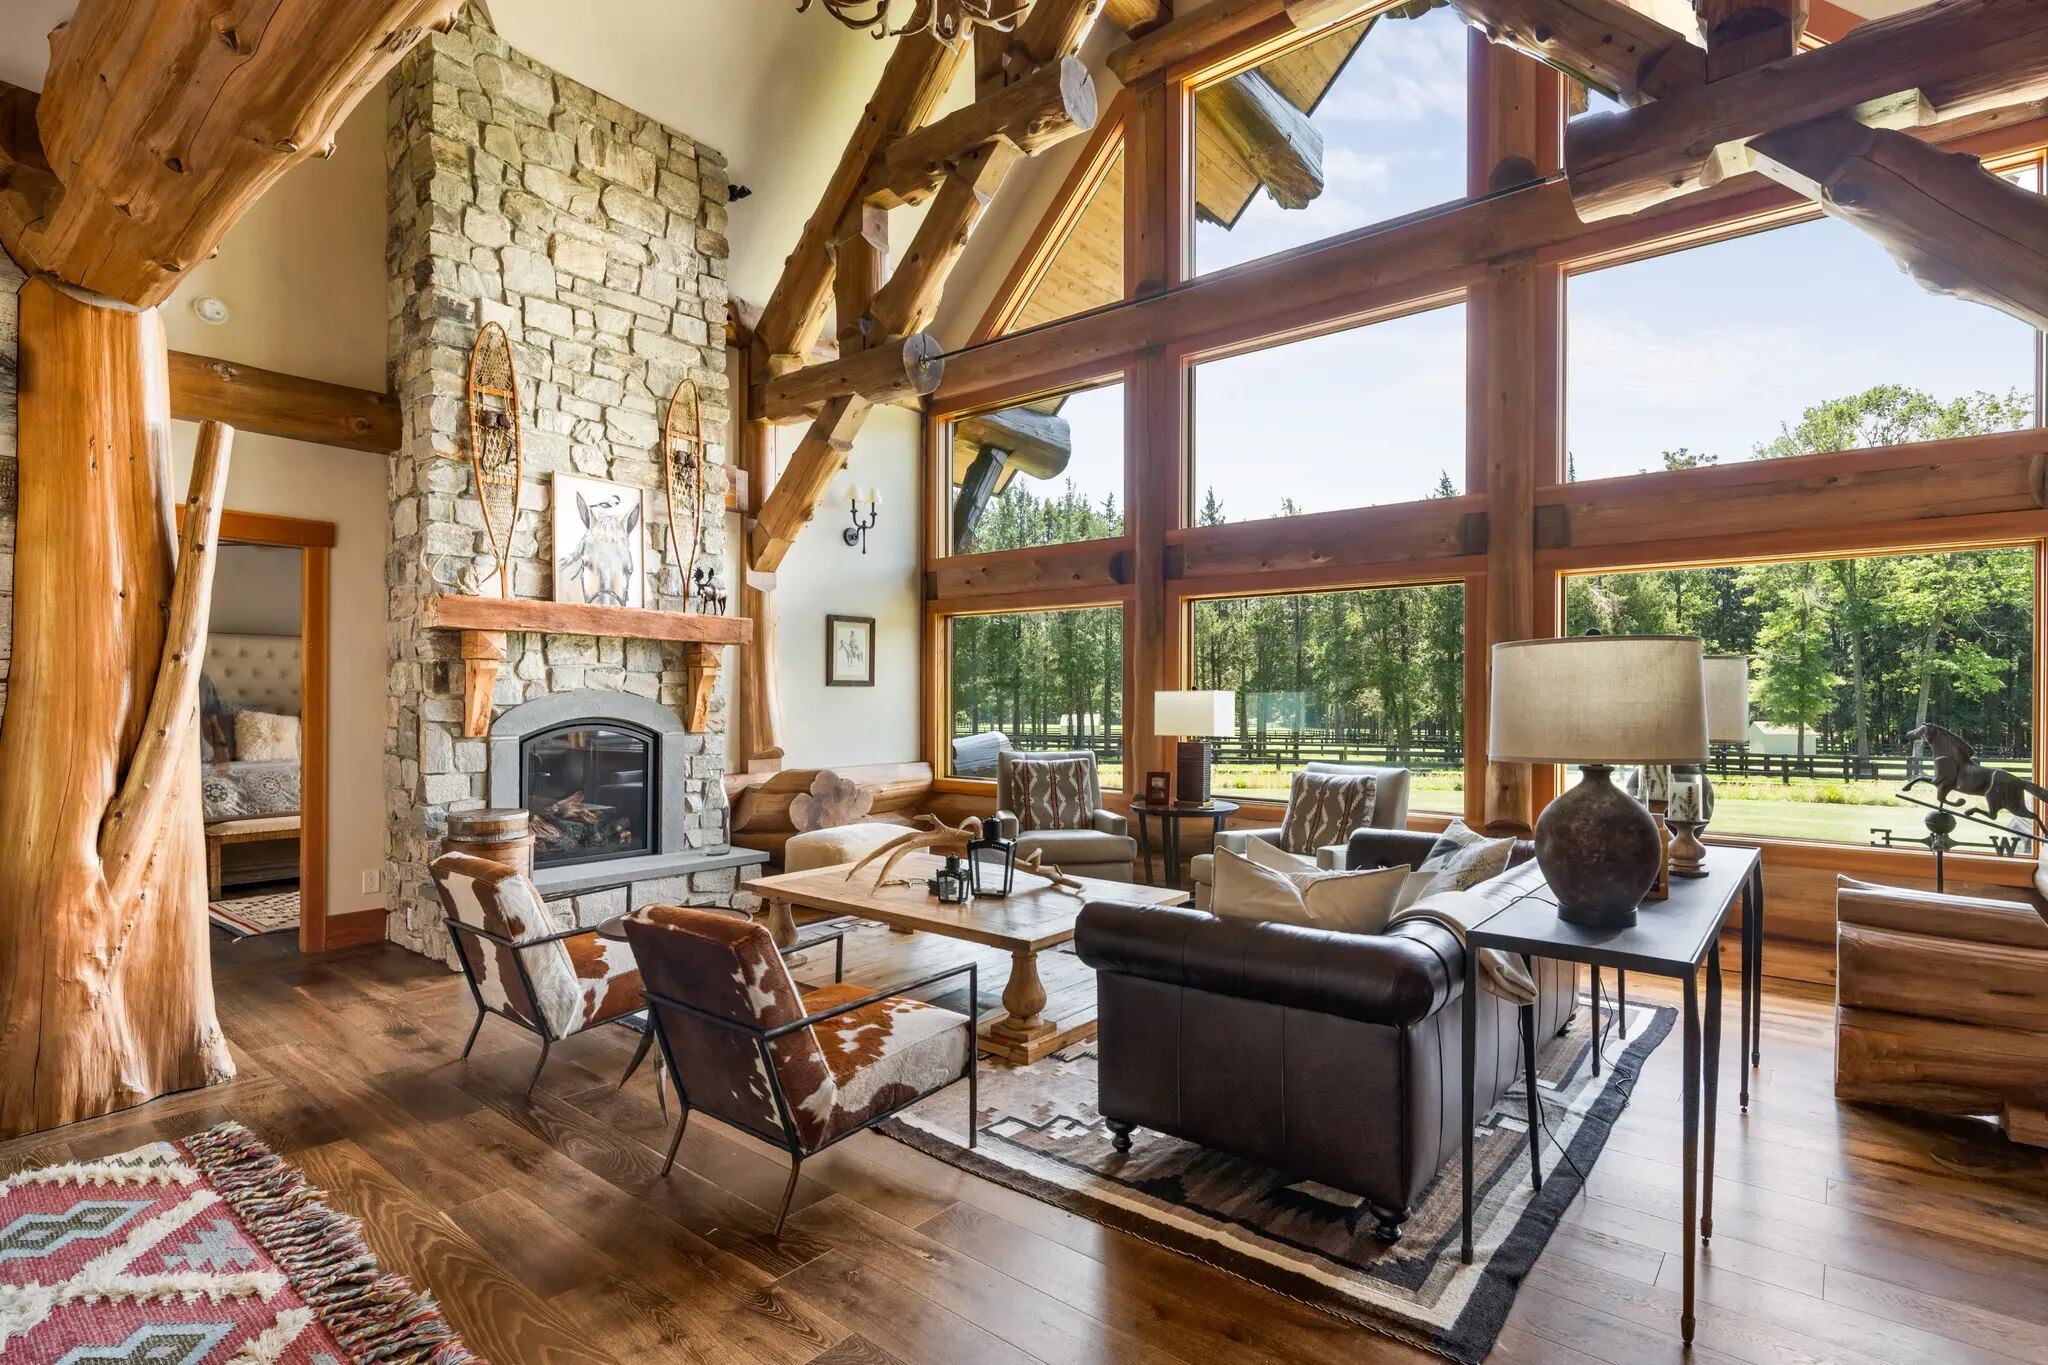 The A-frame great room shows how much of the natural shape of the wood was retained when building the house, which is what the Rodriguezes wanted to emphasize a linkage to the outdoors. The floor-to-ceiling windows add to the effect, offering a view that changes with the seasons.